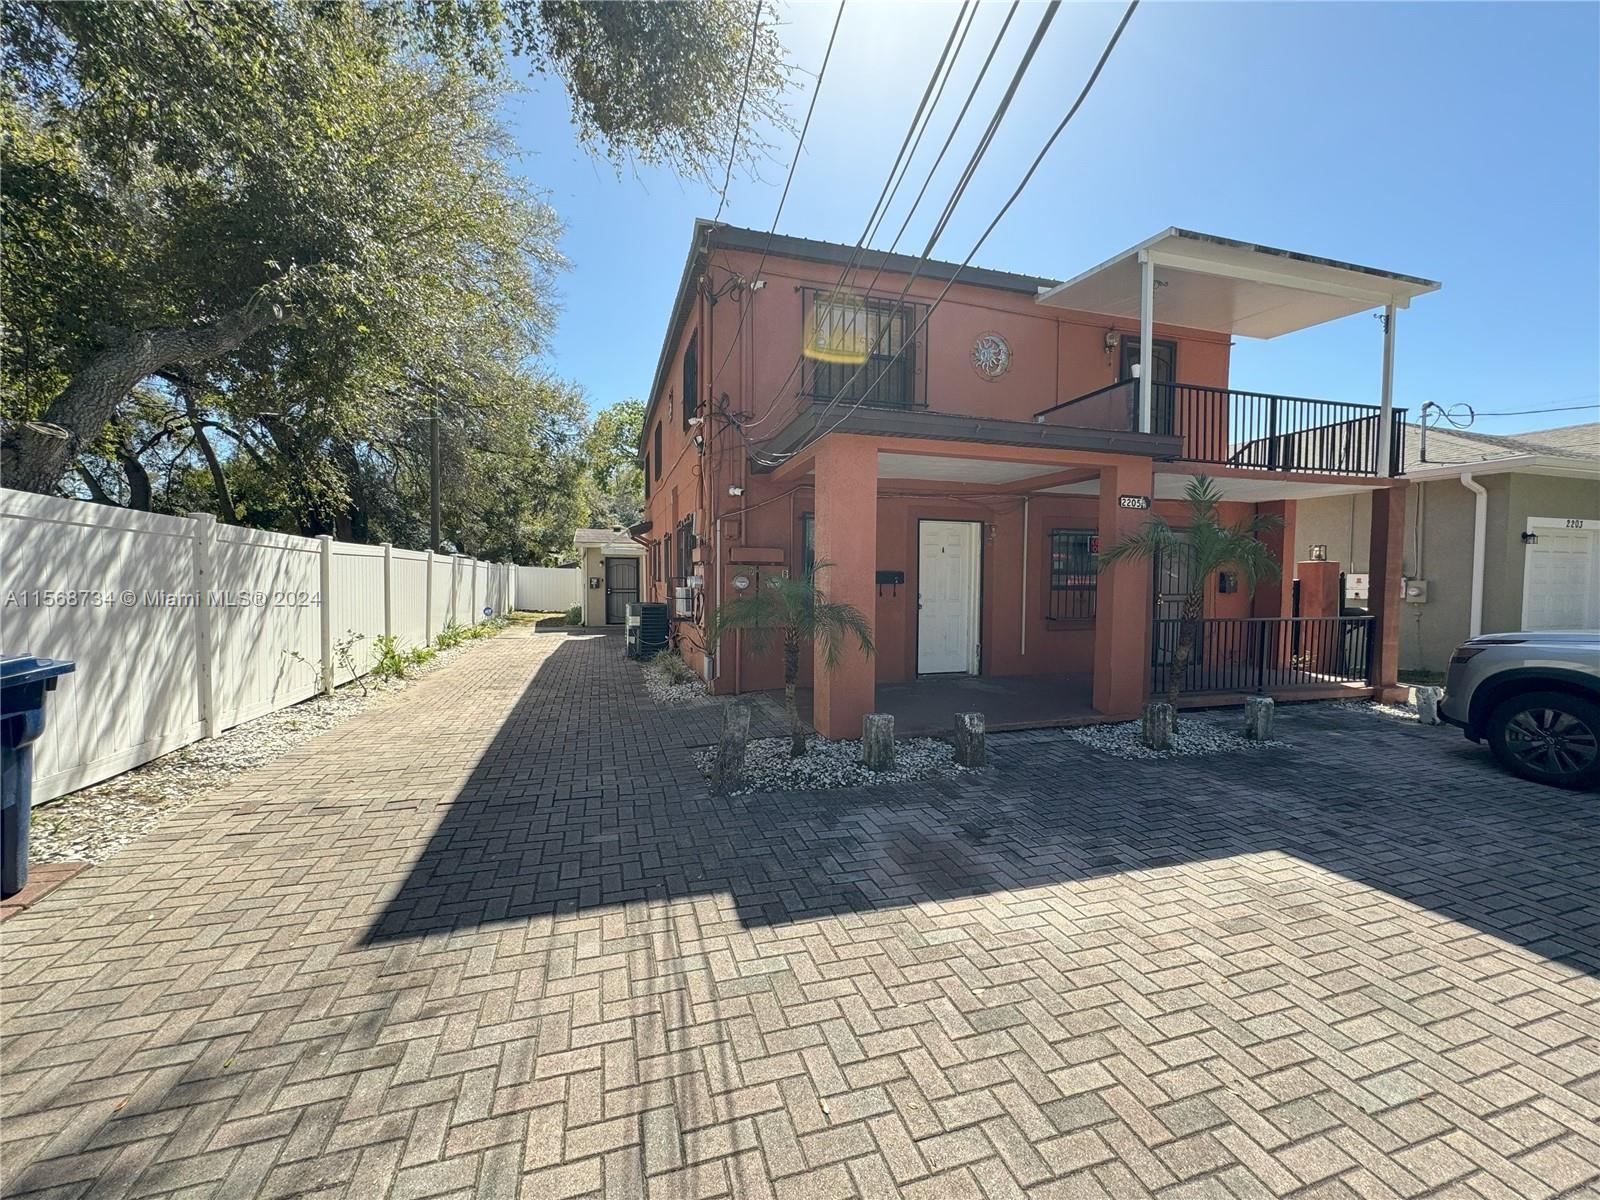 Photo of 2205 Chipco St in Tampa, FL